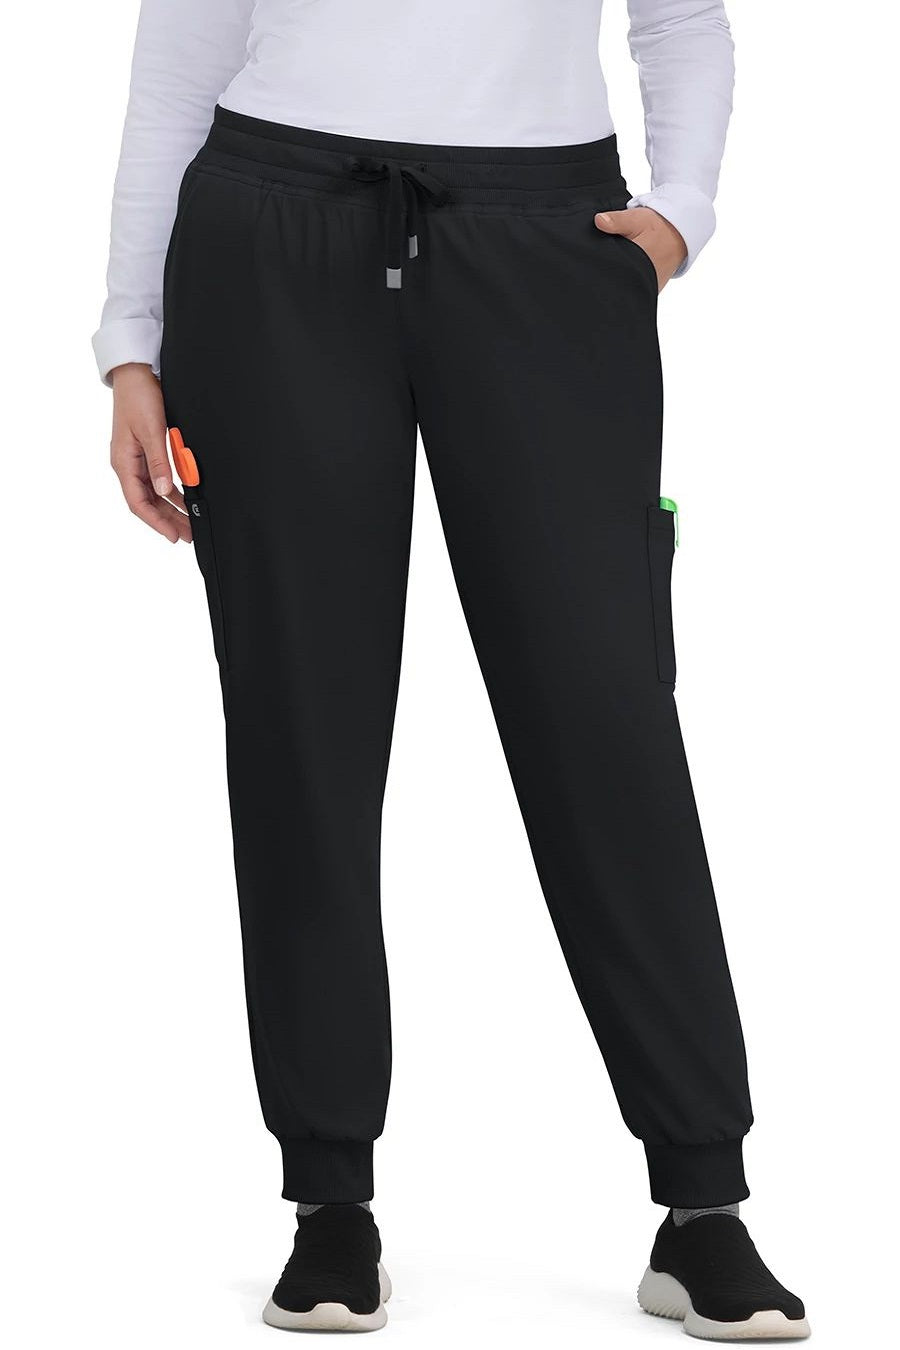 koi Scrub Pants Cureology Pulse Jogger in Black at Parker's Clothing and Shoes.